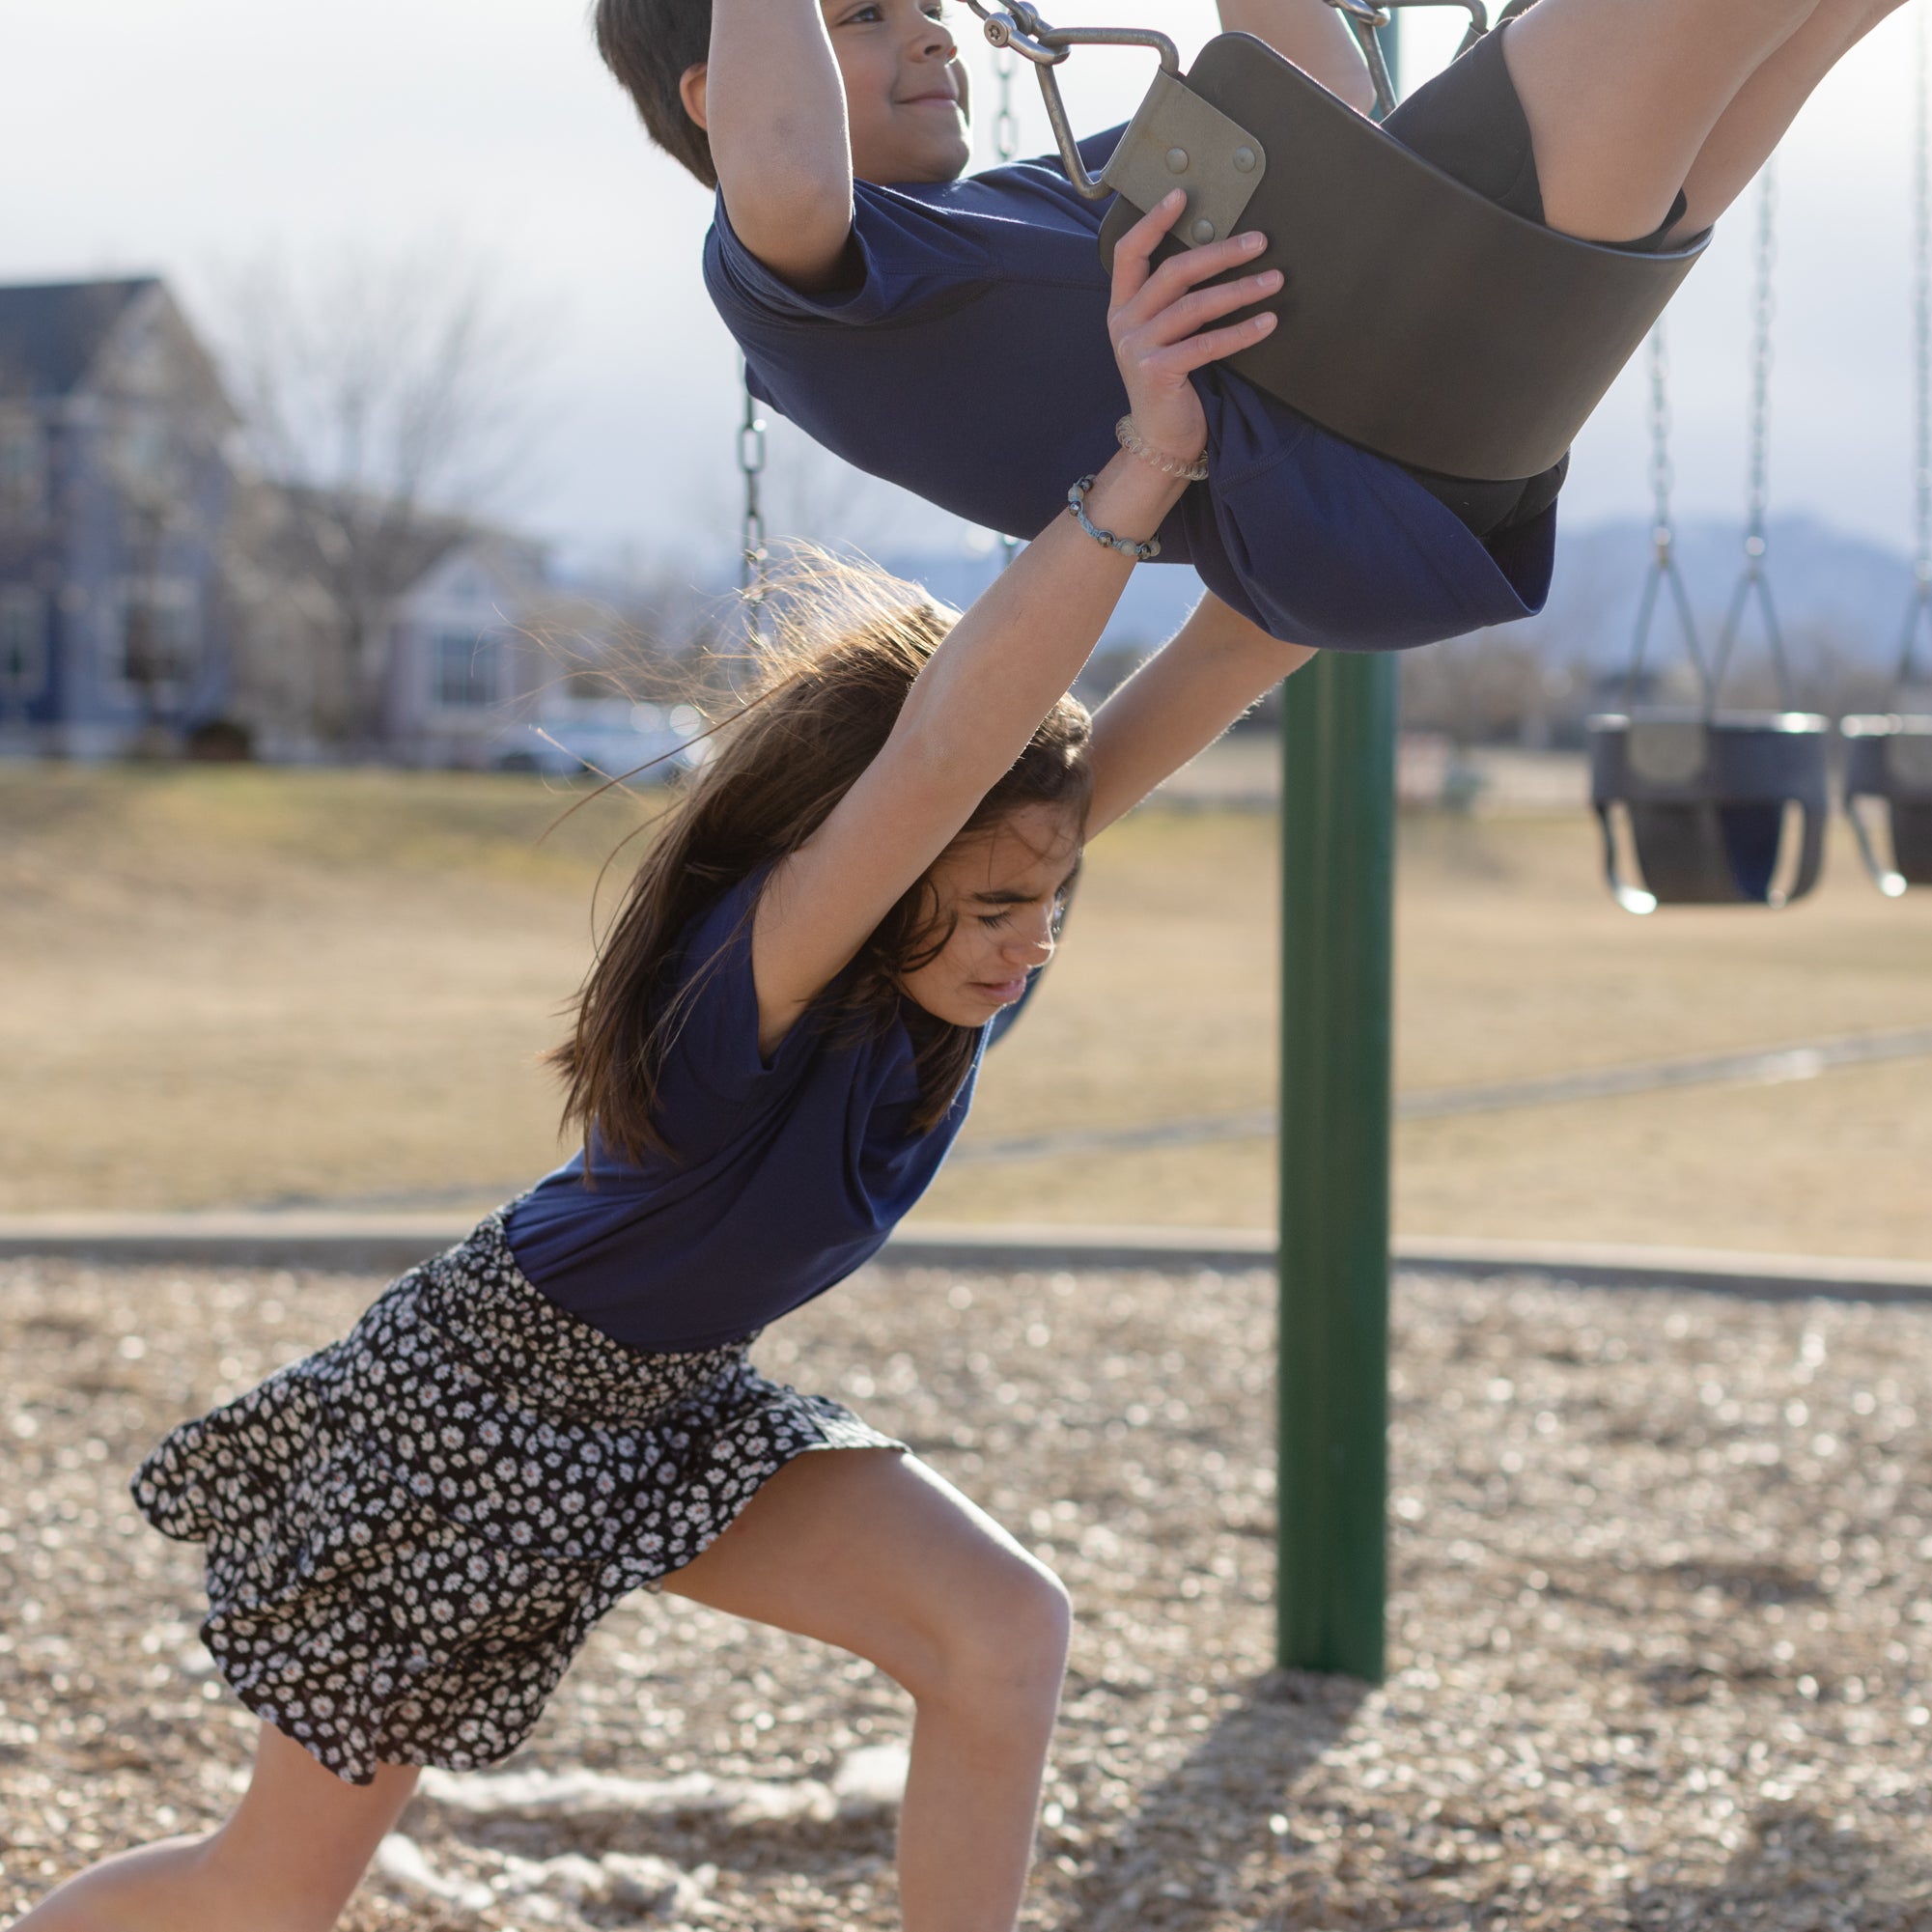 Two kids are playing on the swings together. The little girl is pushing the little boy who is sitting on the black swings. They are both wearing a navy blue basic t-shirt. The little girl is wearing a black and white skirt, and the boy is wearing black shorts.